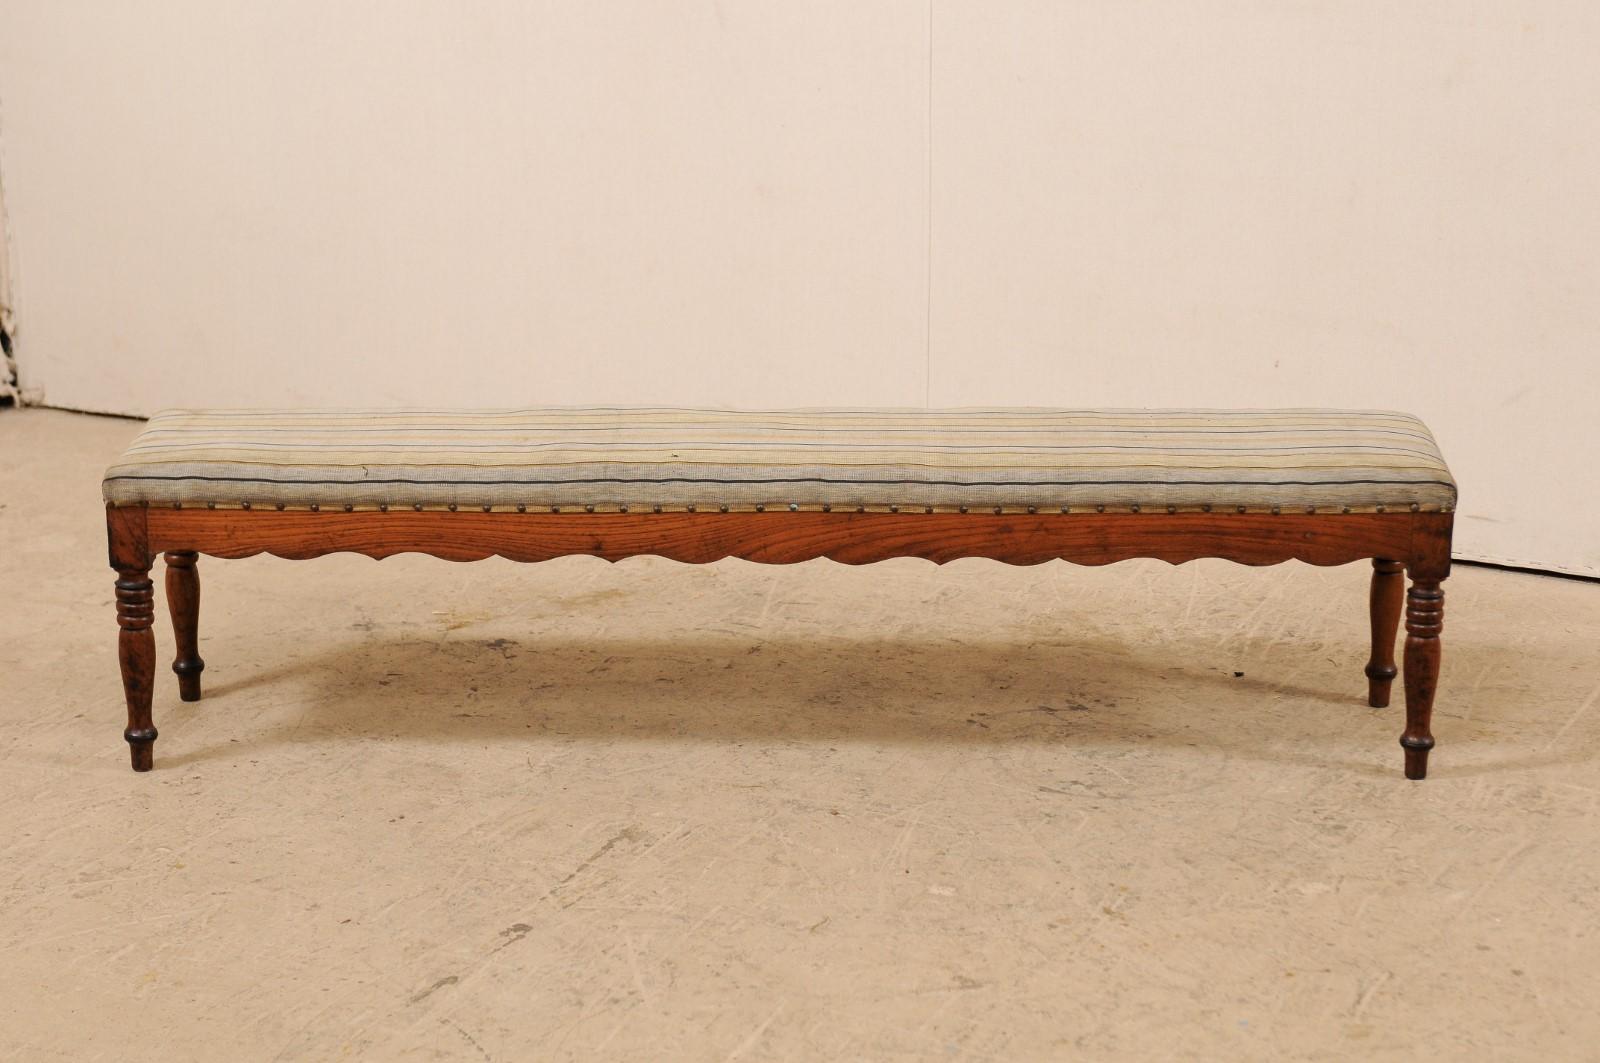 A slender French upholstered seat and carved wood bench from the early 19th century. This antique bench from France features a thinly profiled and upholstered seat, with a wood skirt with wavy carved designs about all bottom sides, and is raised